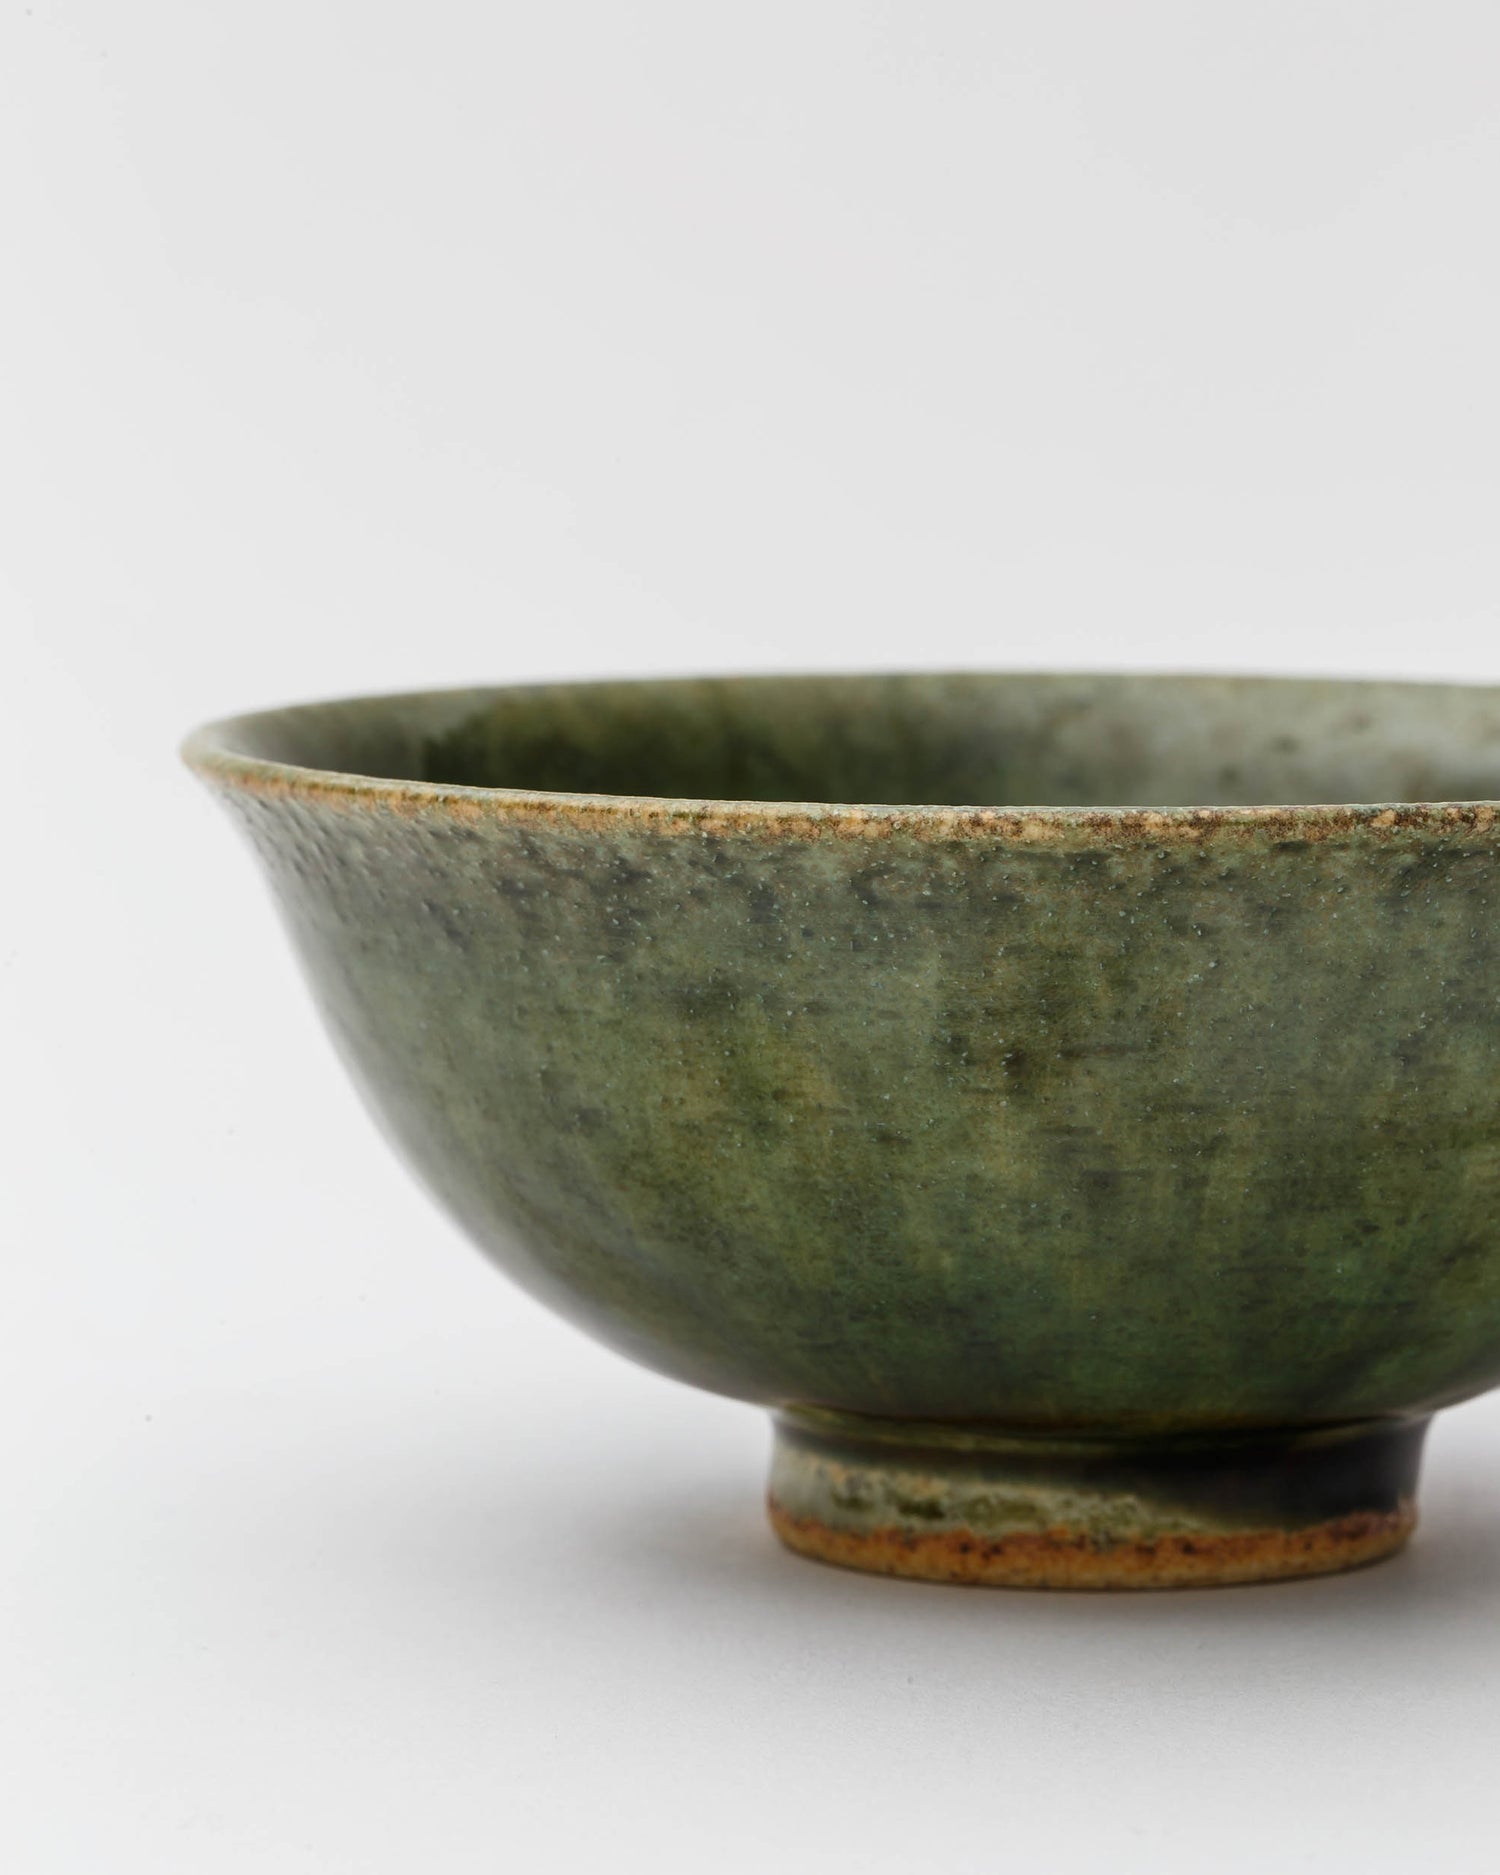 Cropped image of ceramic oribe rice bowl with deep green glaze by Time and Style against white-gray background. 